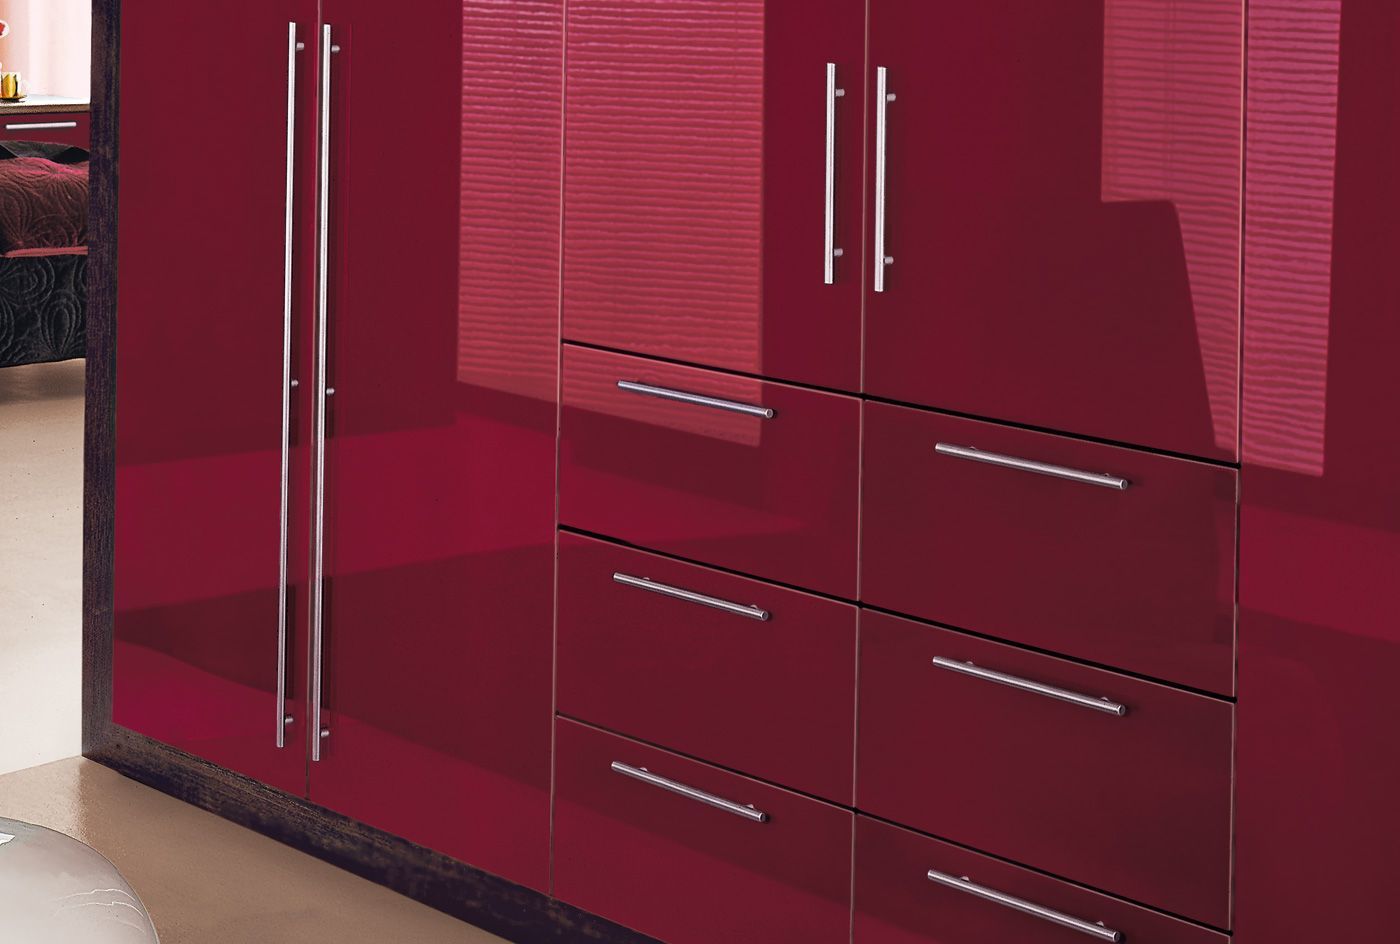 Glossy Cherry Wardrobes | Fitted Bedroom Furniture, Wardrobe Design  Bedroom, Fitted Bedrooms Regarding Wardrobes In Cherry (Photo 1 of 15)